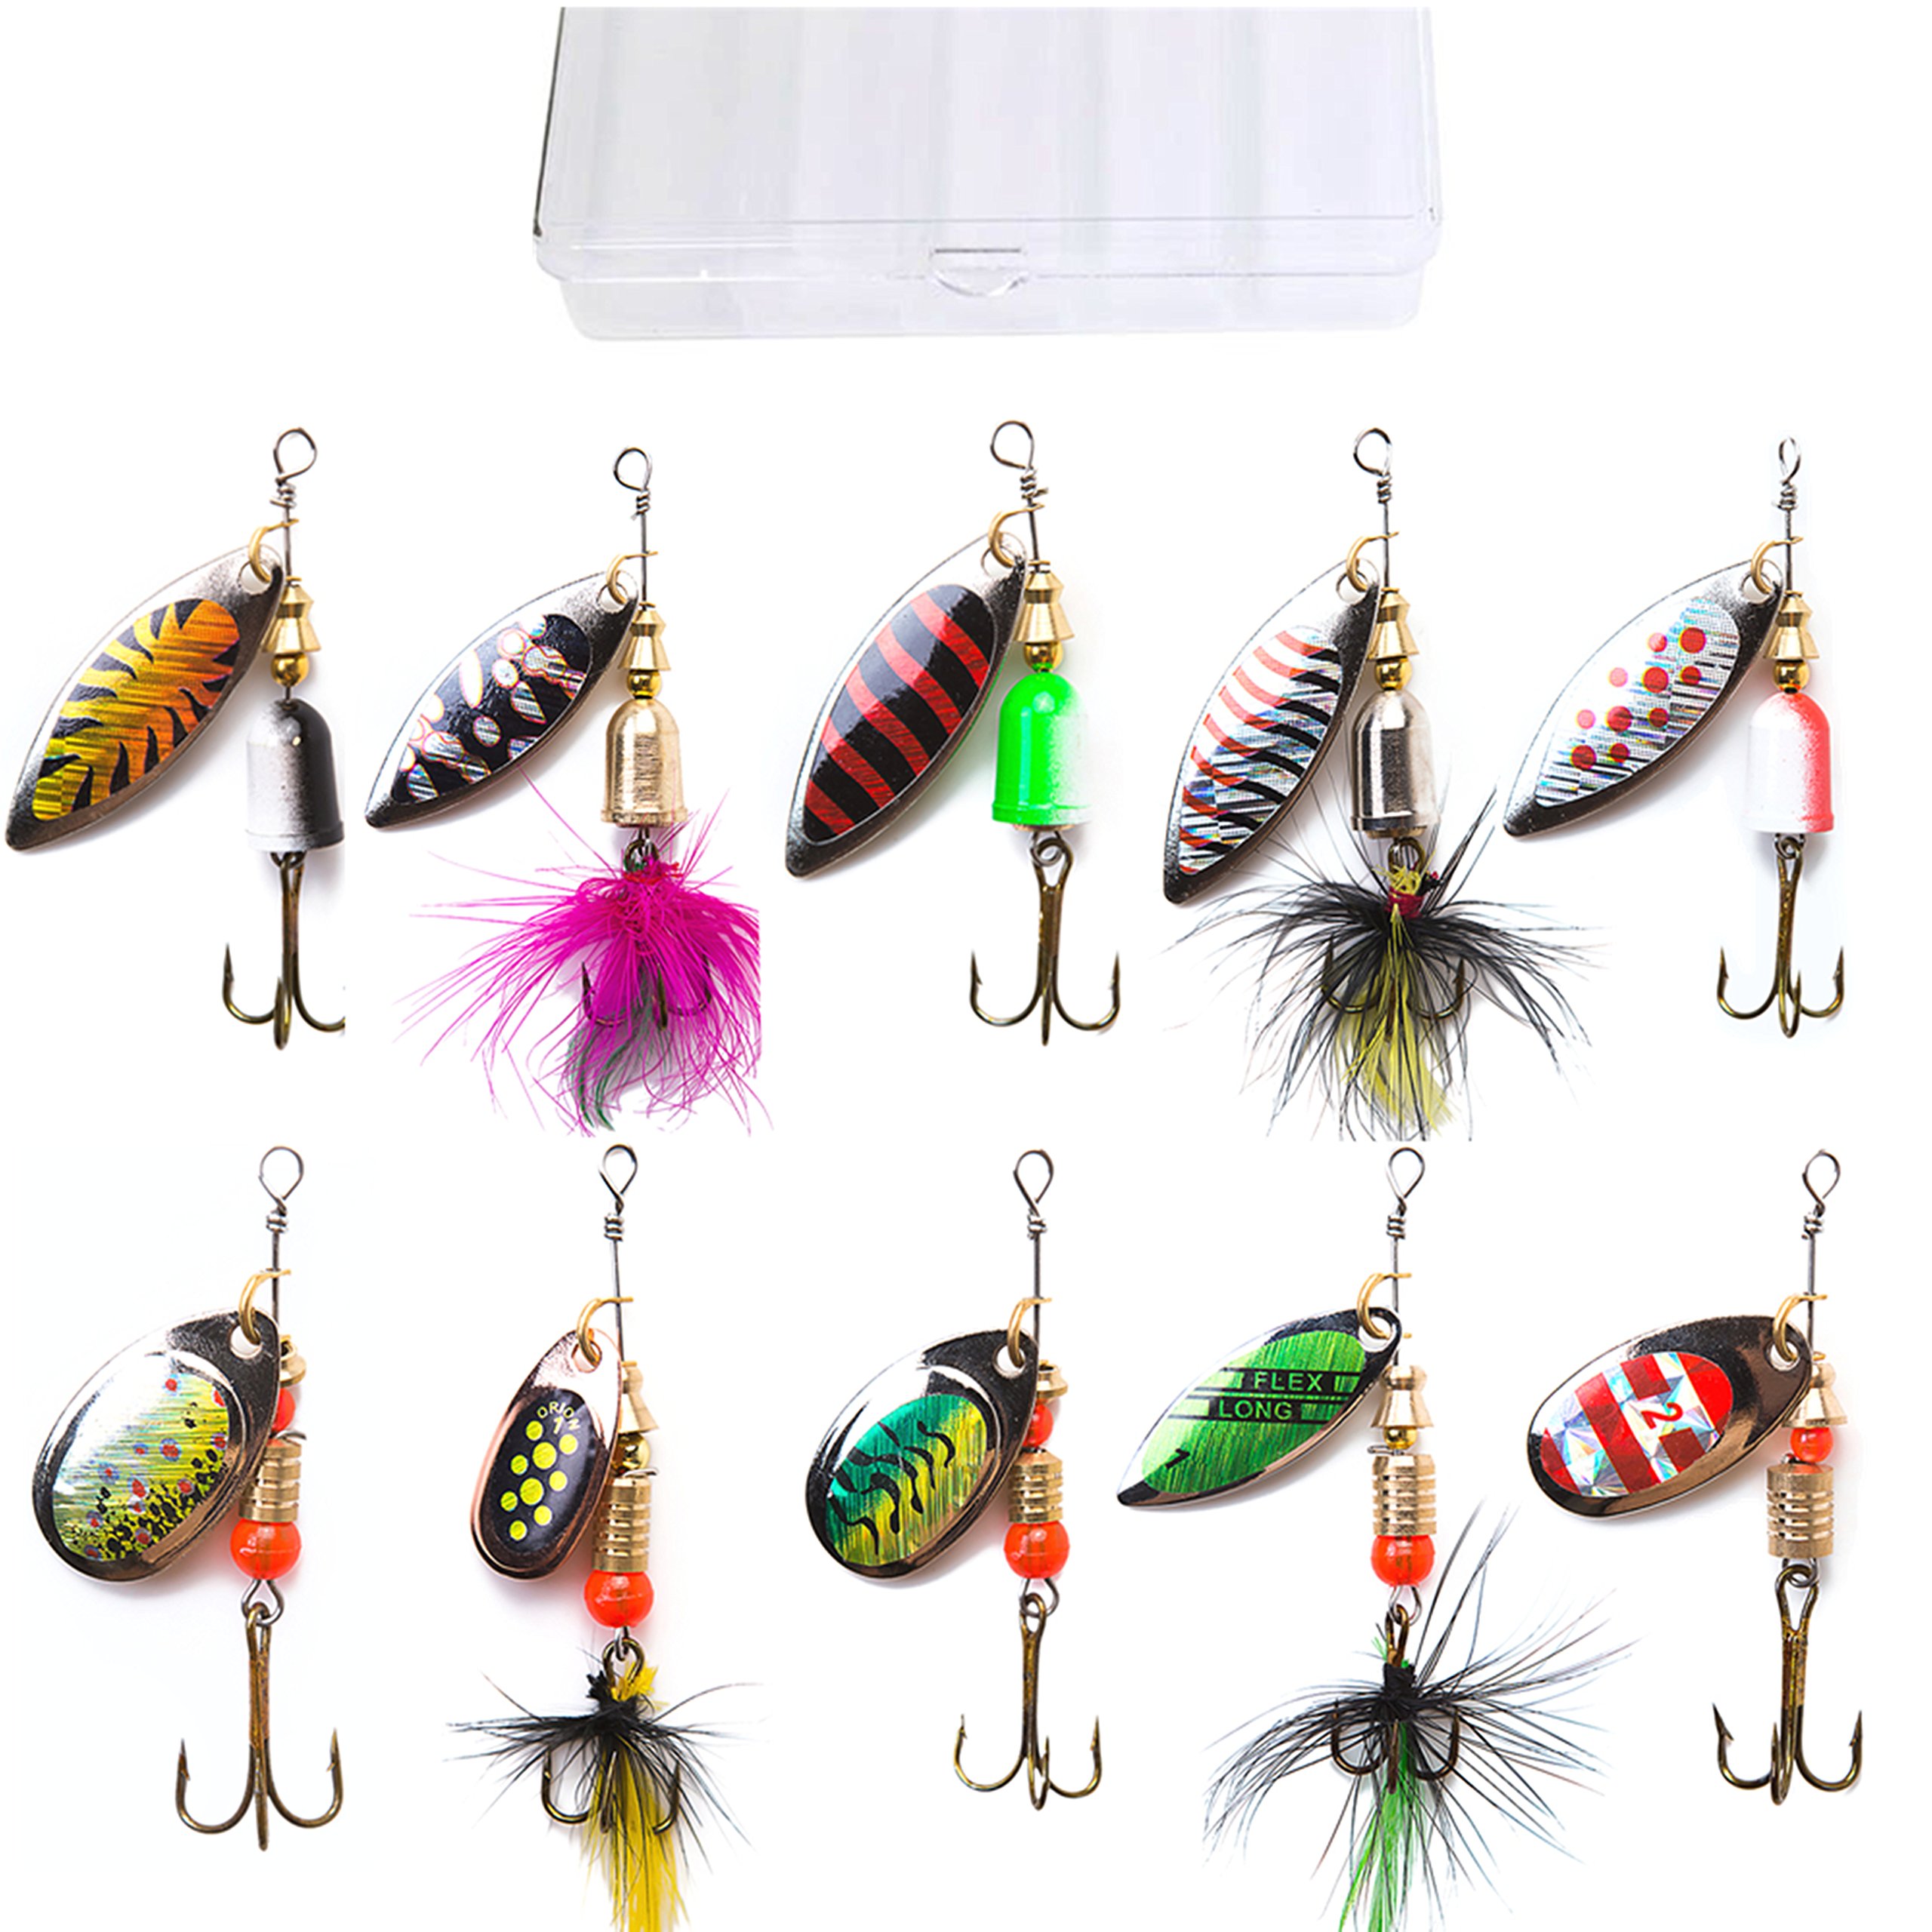 kingforest 5-10-20pcs Fishing Lures Spinnerbait for Bass Trout